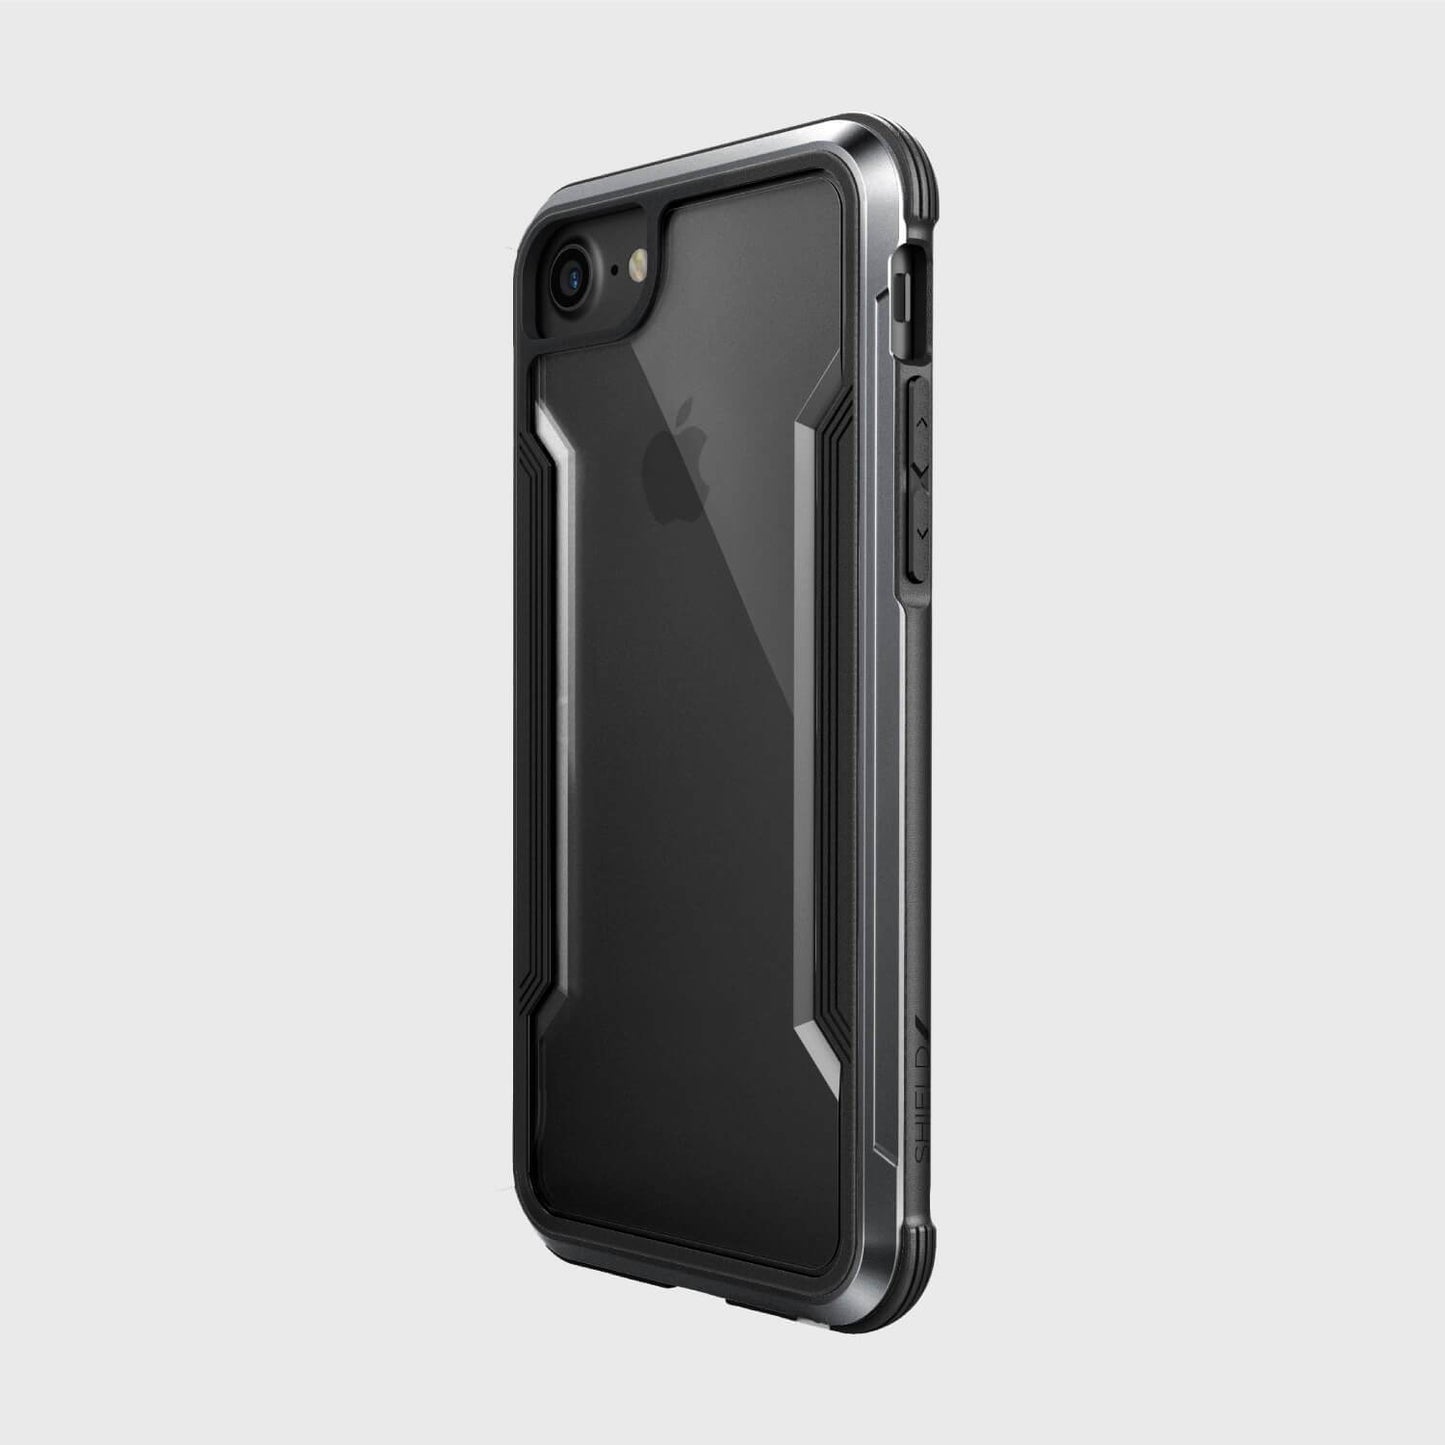 The back view of an iPhone SE/8/7 Case - SHIELD by Raptic.